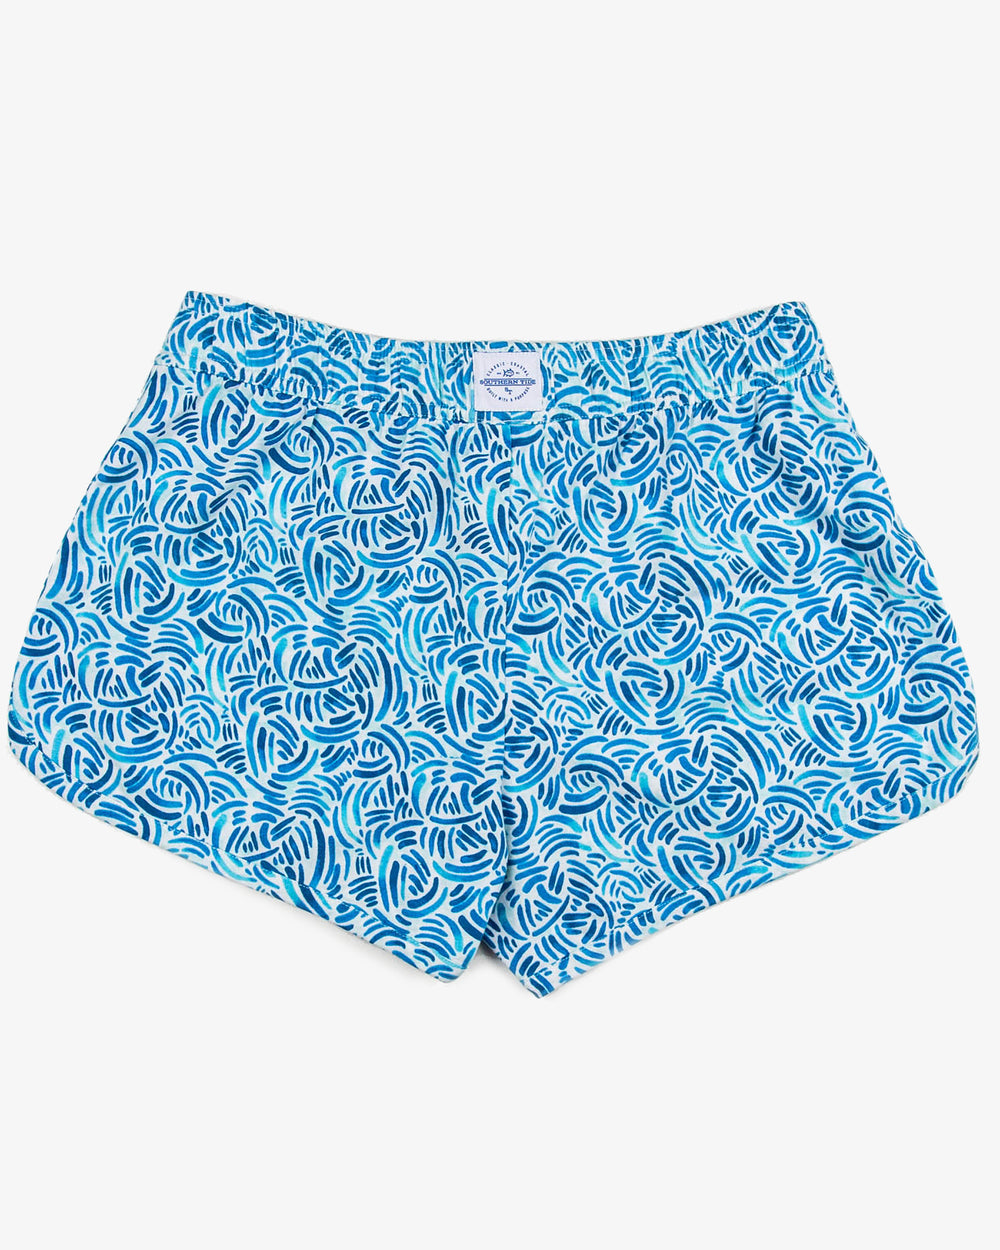 The back view of the Southern Tide Watercolor White Print Lounge Short by Southern Tide - Atlantic Blue